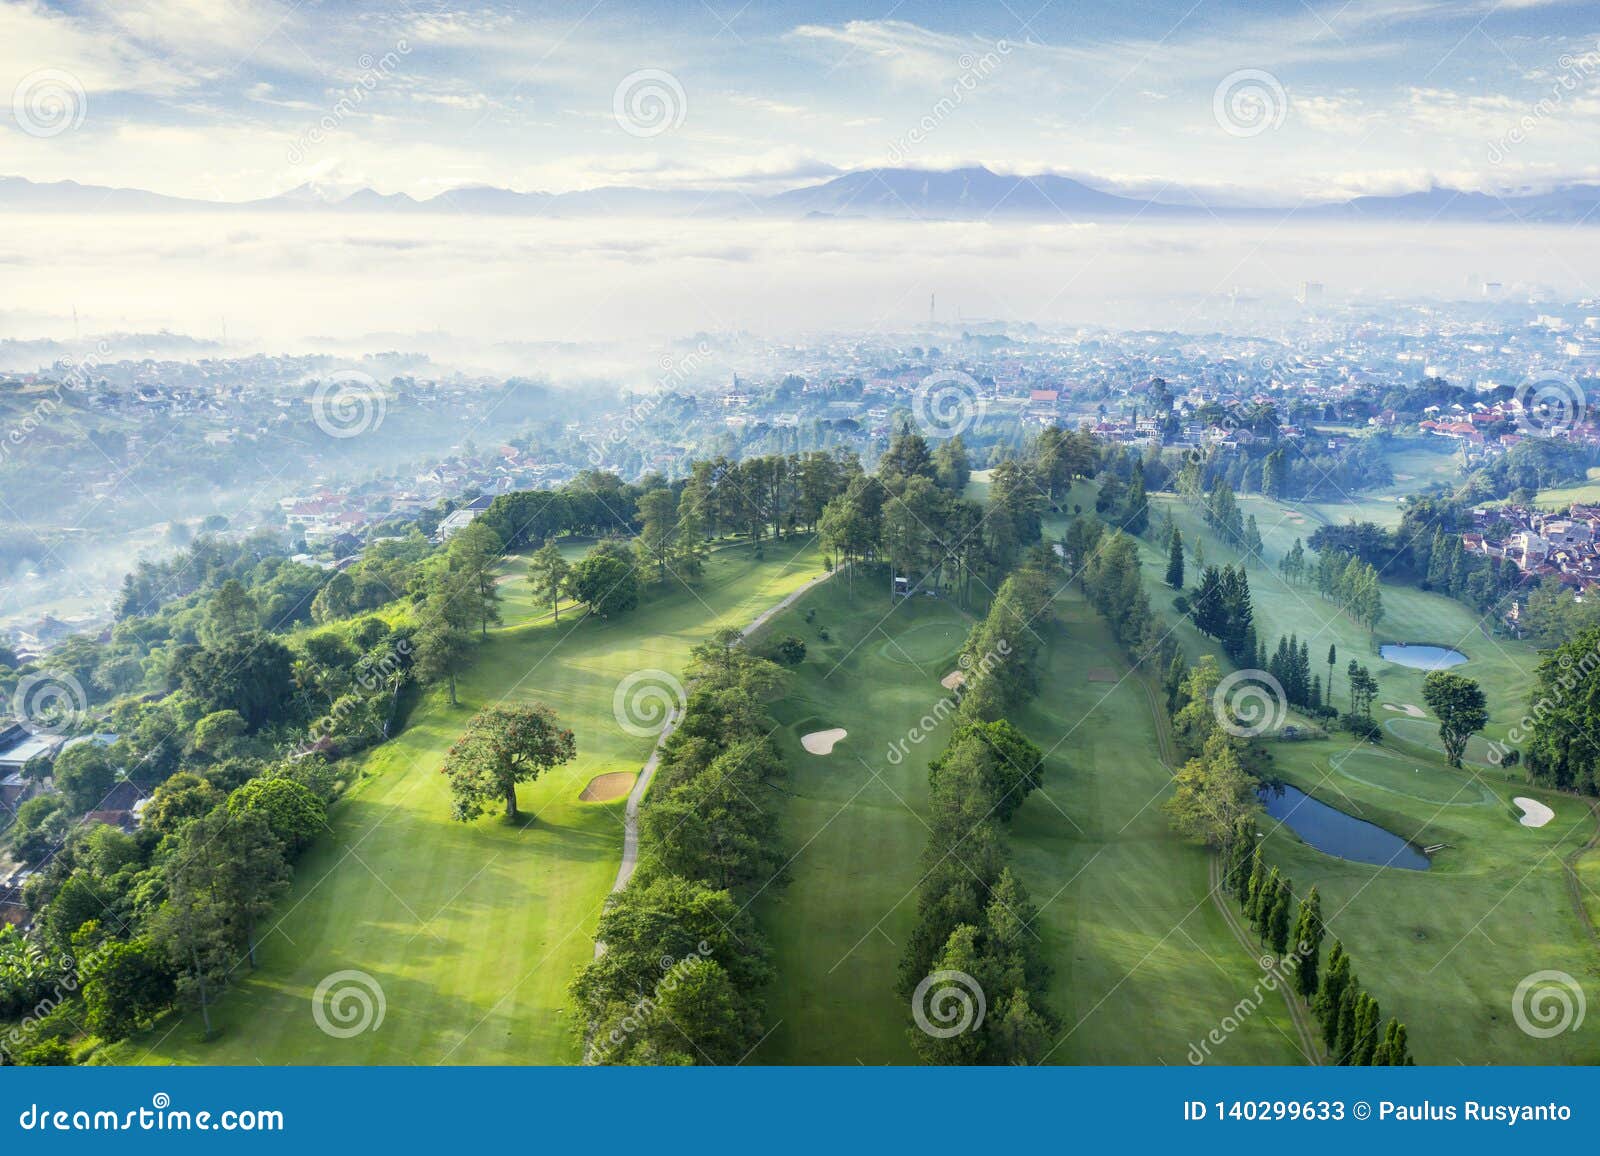 beautiful golf course with misty bandung cityscape